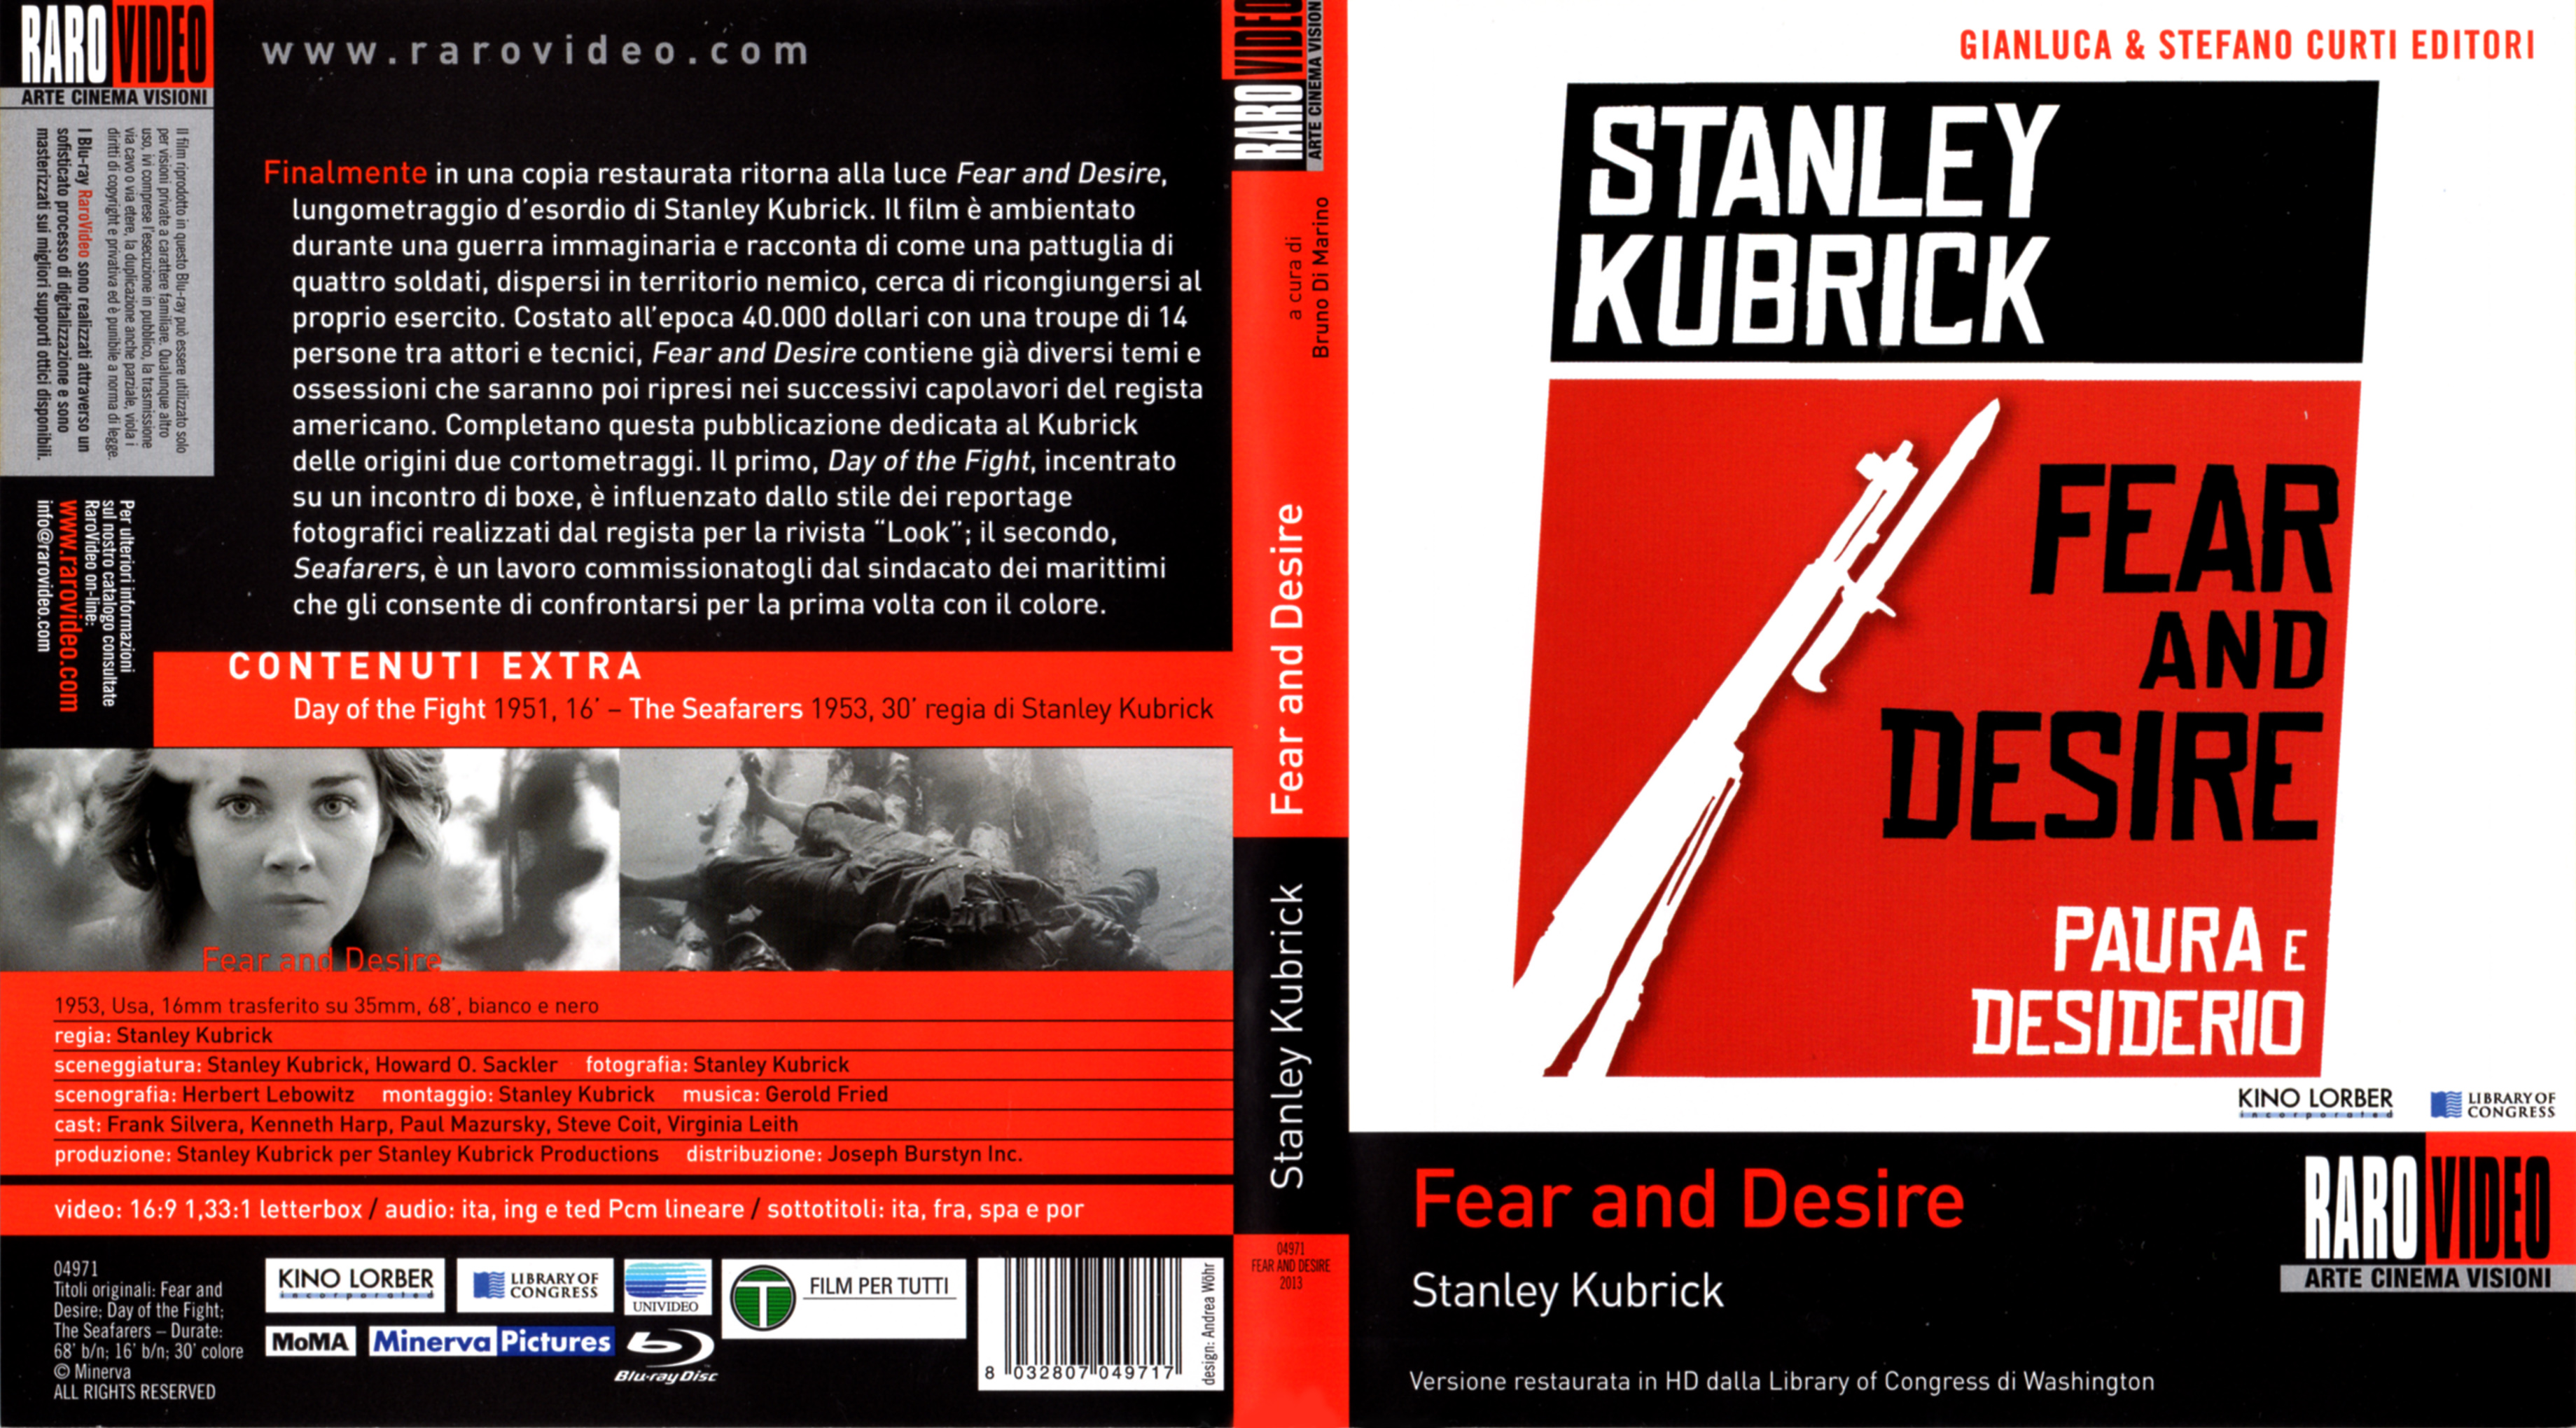 Jaquette DVD Fear and desire (BLU-RAY)